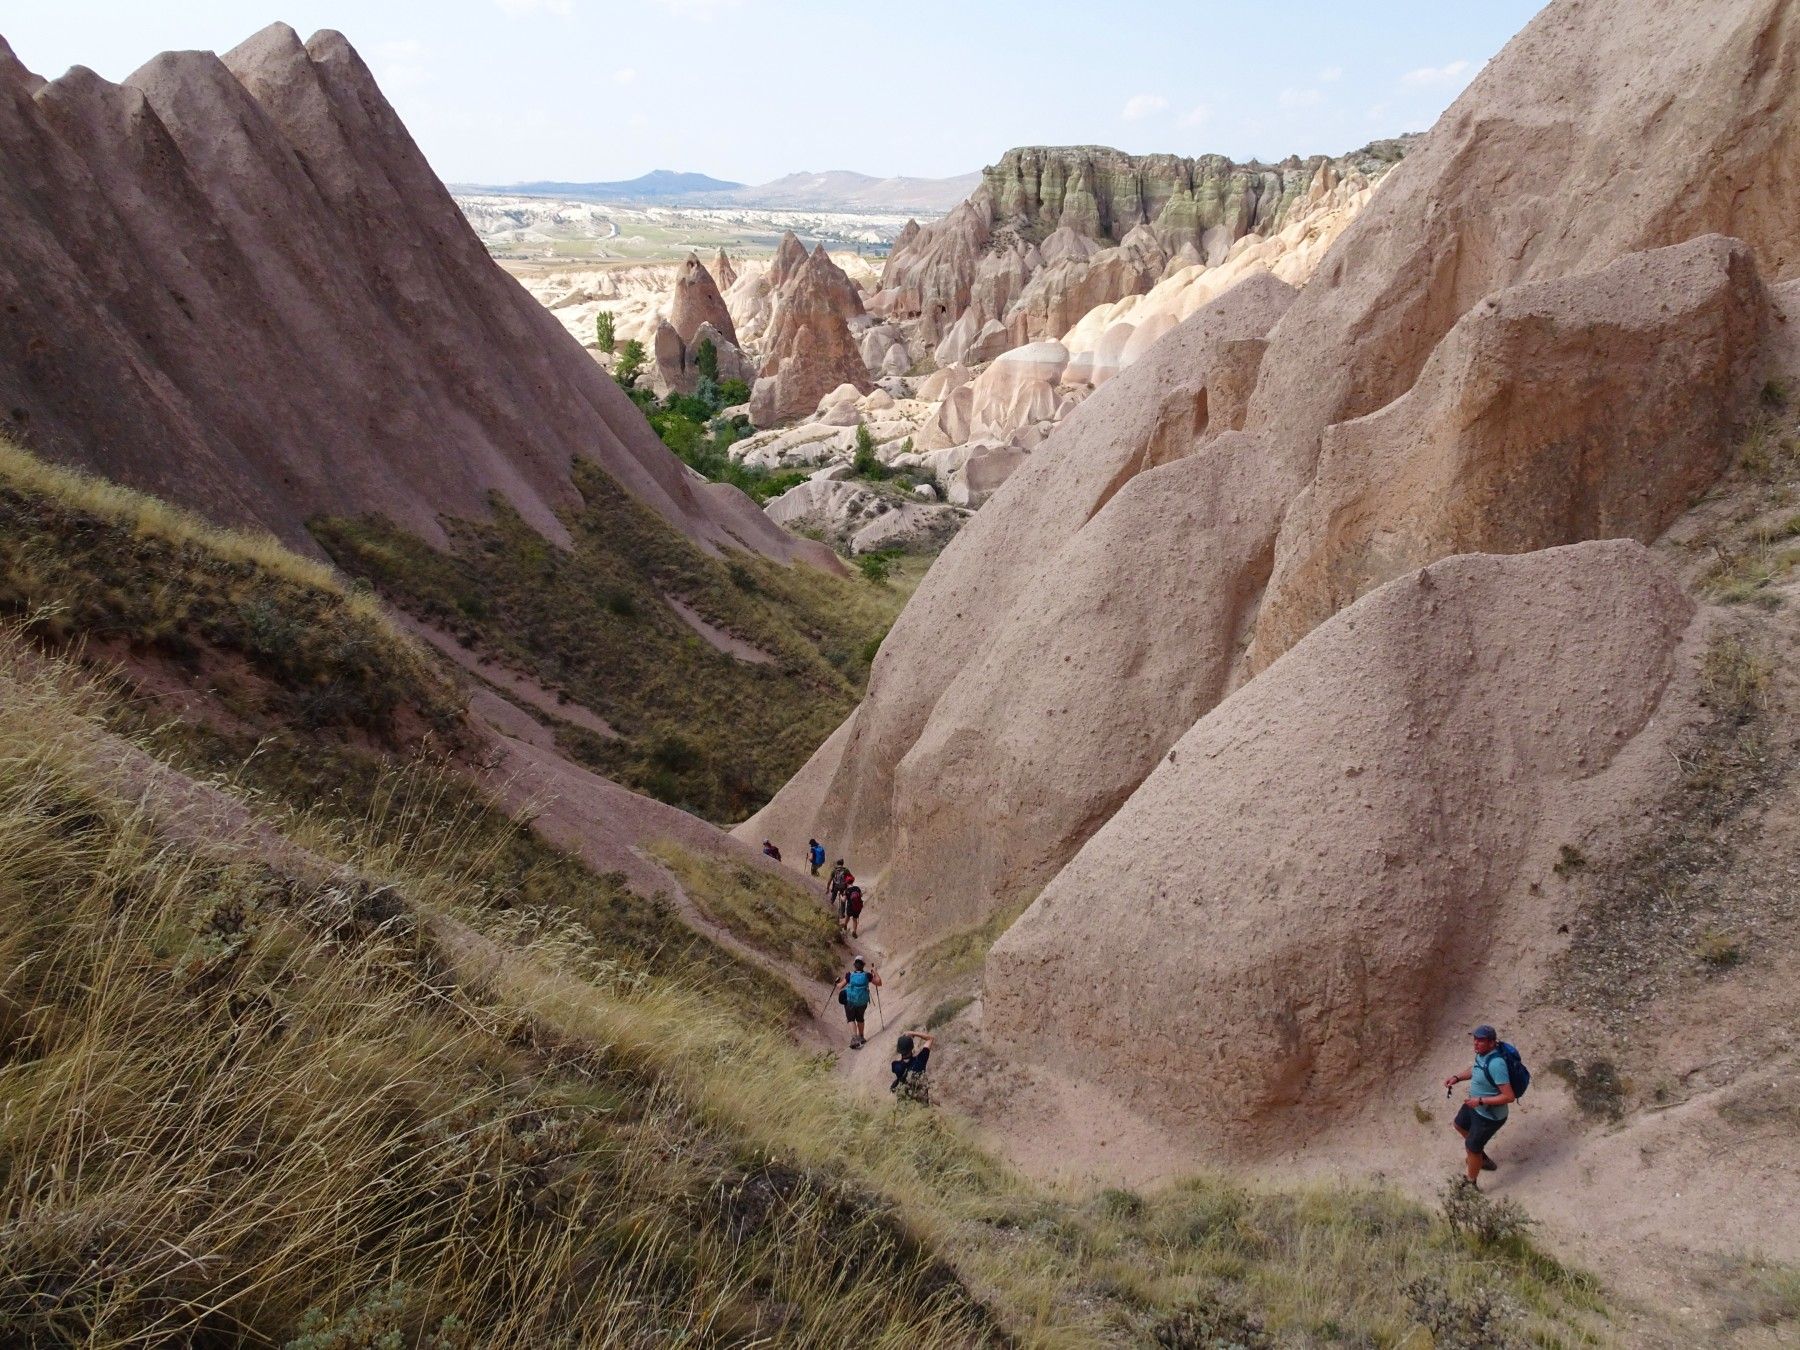 Hikers walk down a trail in Turkey's Cappadocia region, with the fairy chimneys on either side.